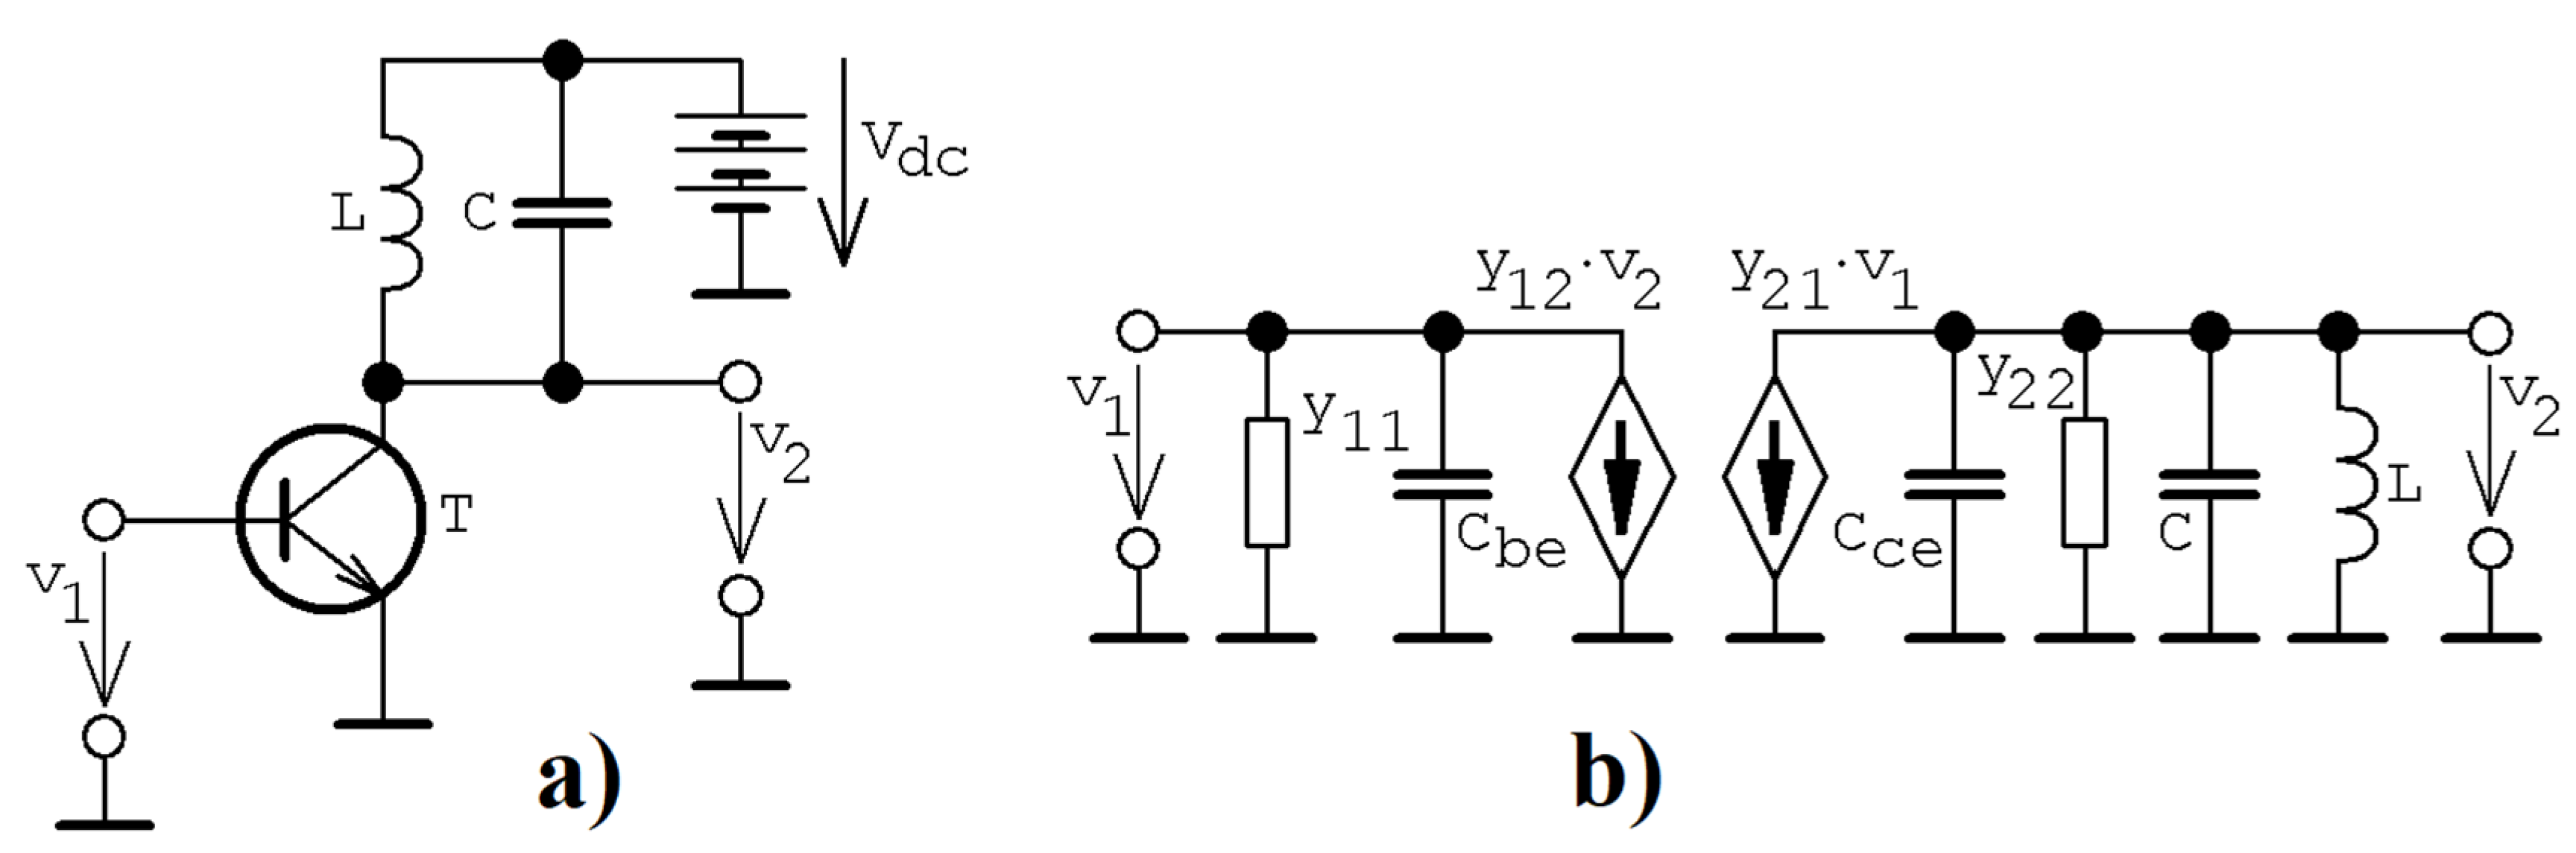 Applied Sciences Free Full Text Generalized Single Stage Class C Amplifier Analysis From The Viewpoint Of Chaotic Behavior Html